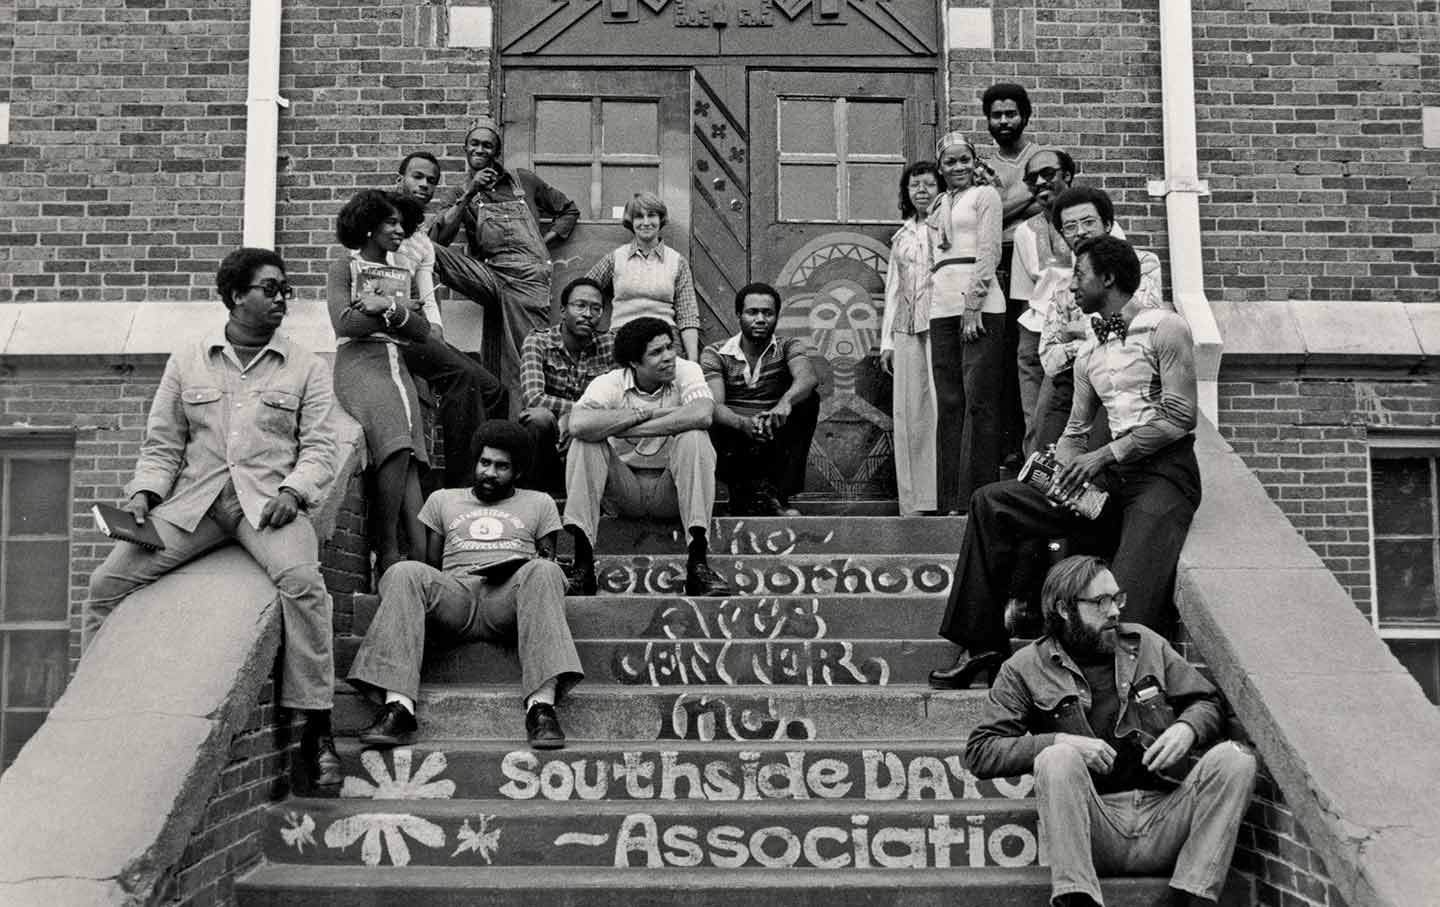 The Black Arts Movement’s Revolution in the South